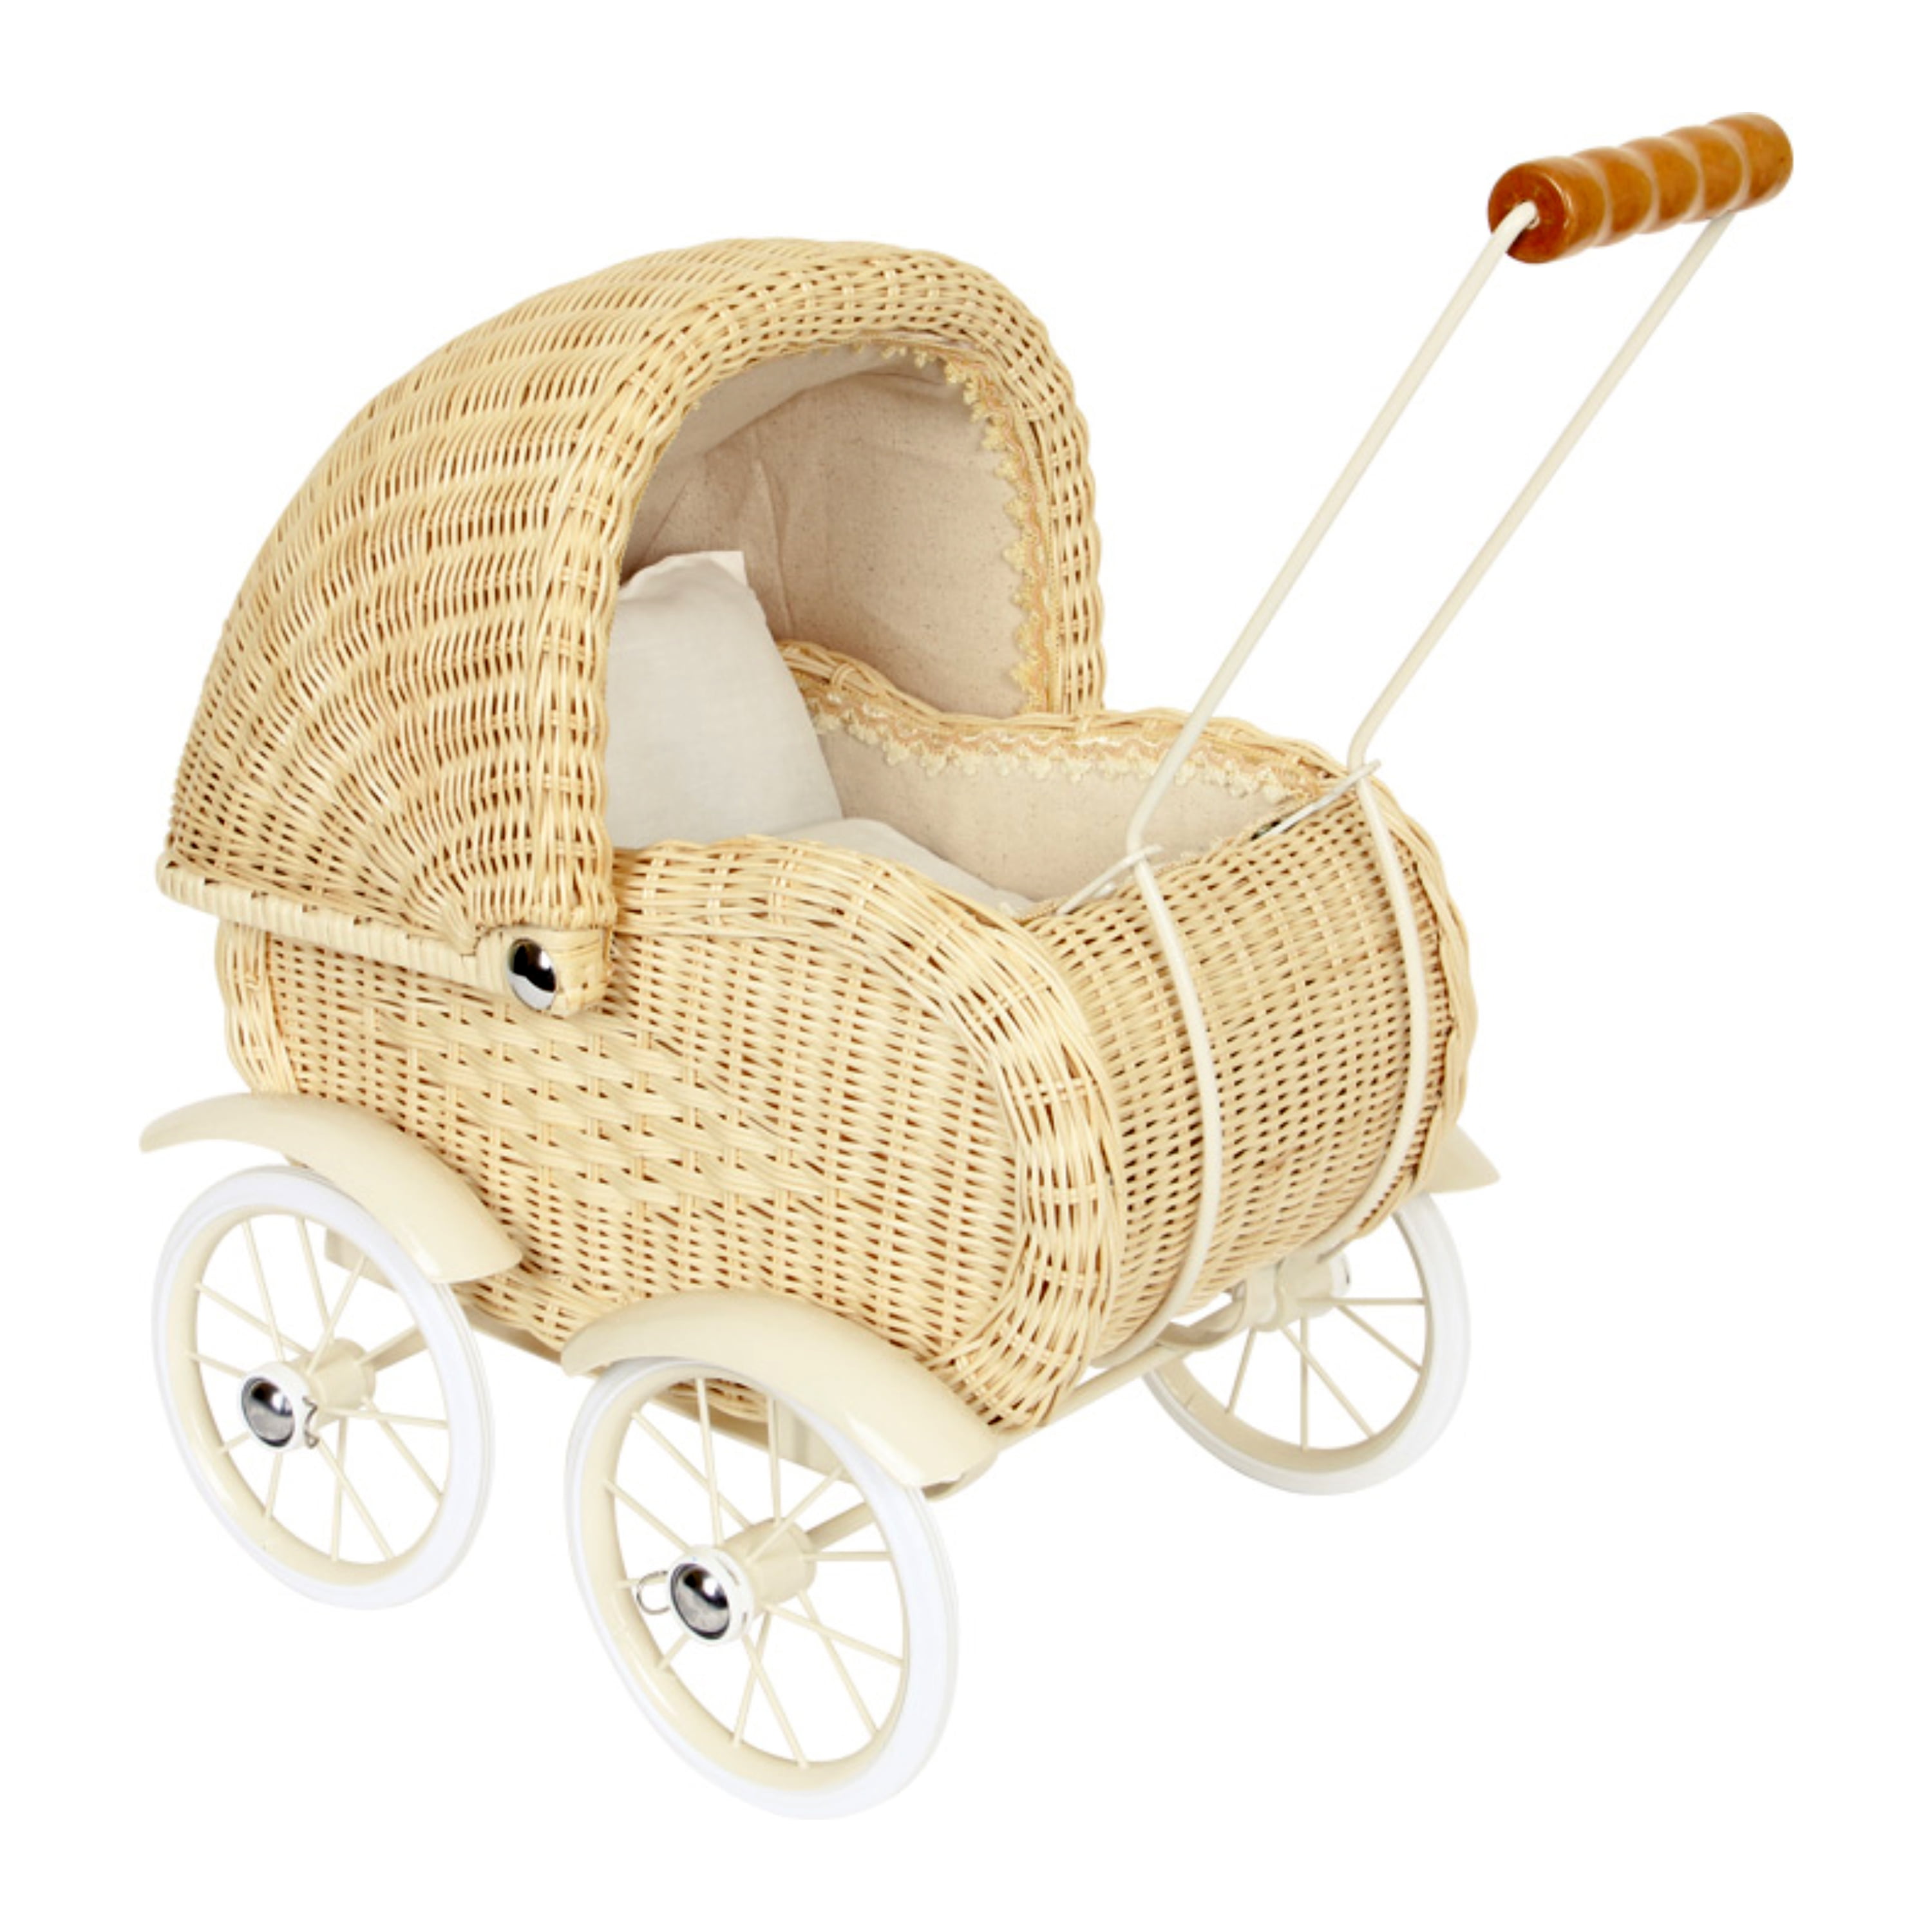 Personalised wicker toys Wicker wagon for toddlers First birthday Personalized baby wicker walker Doll pram with bedding included